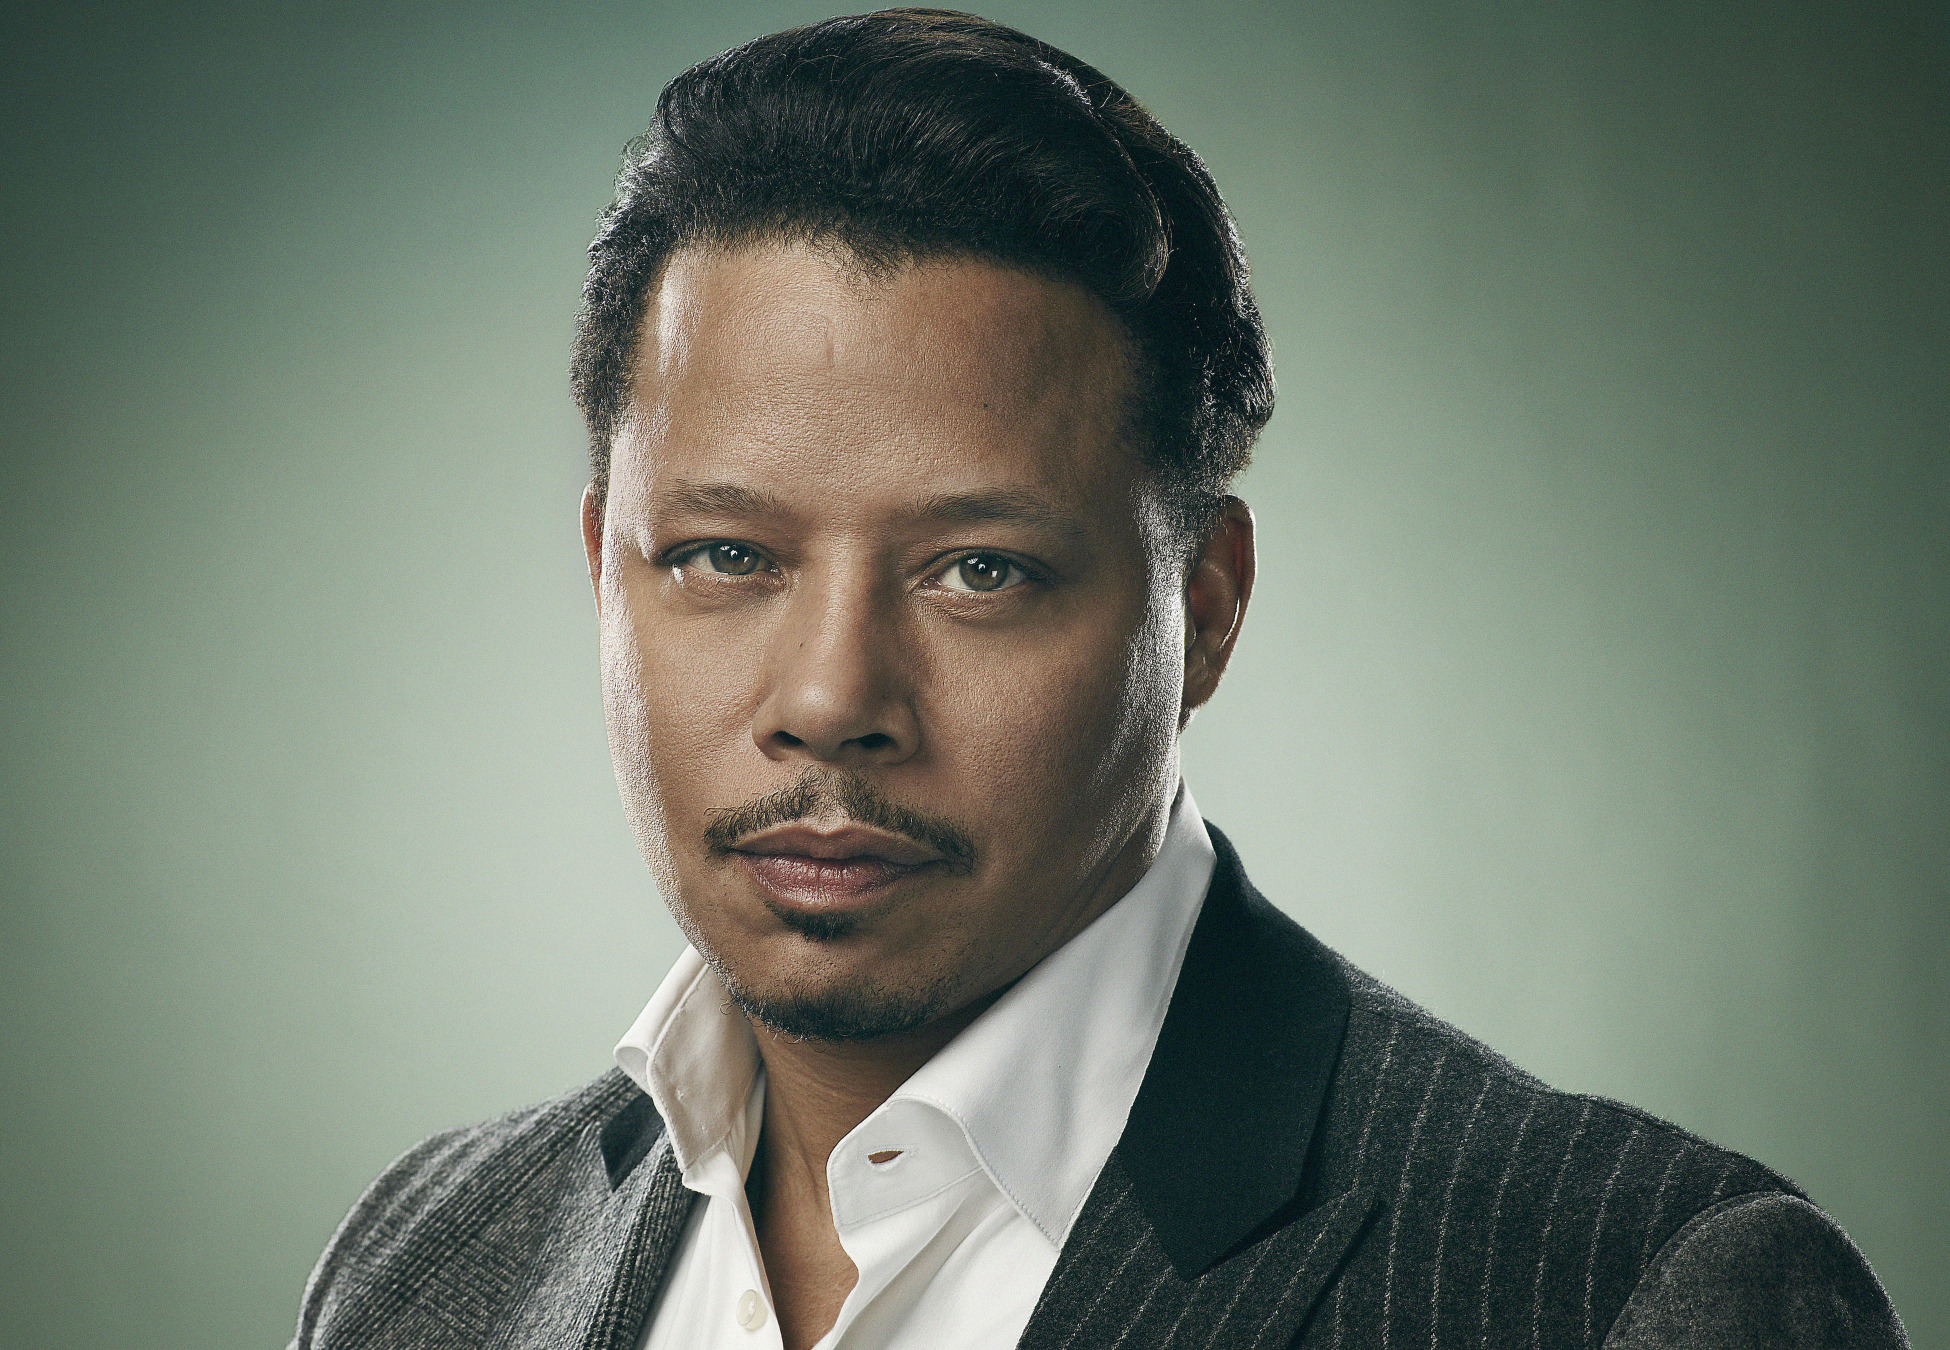 Free #lucious Full HD Wallpaper images.